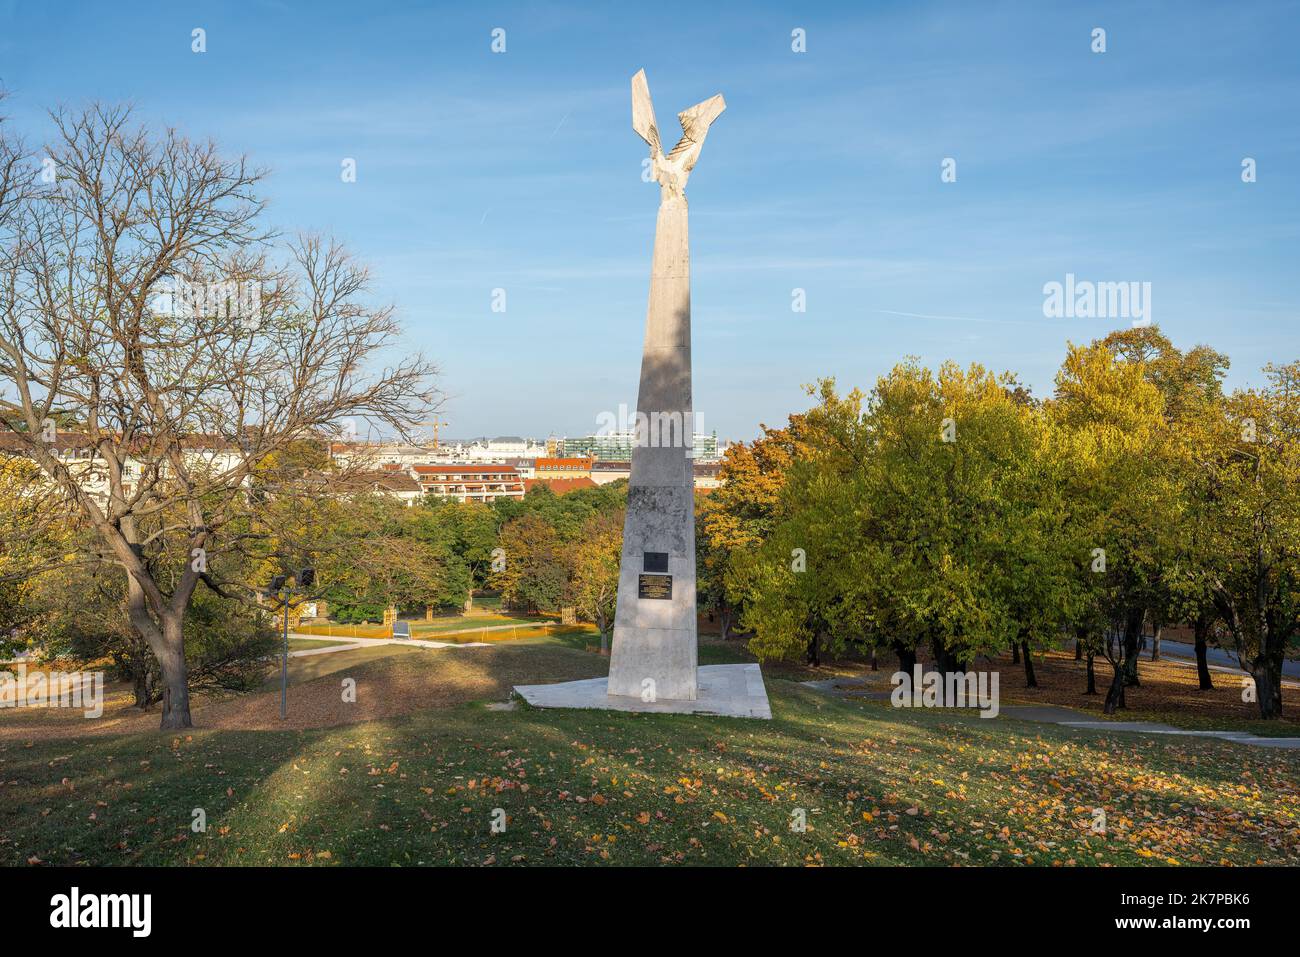 Memorial of the 1956s Revolution at Taban Park - Budapest, Hungary Stock Photo